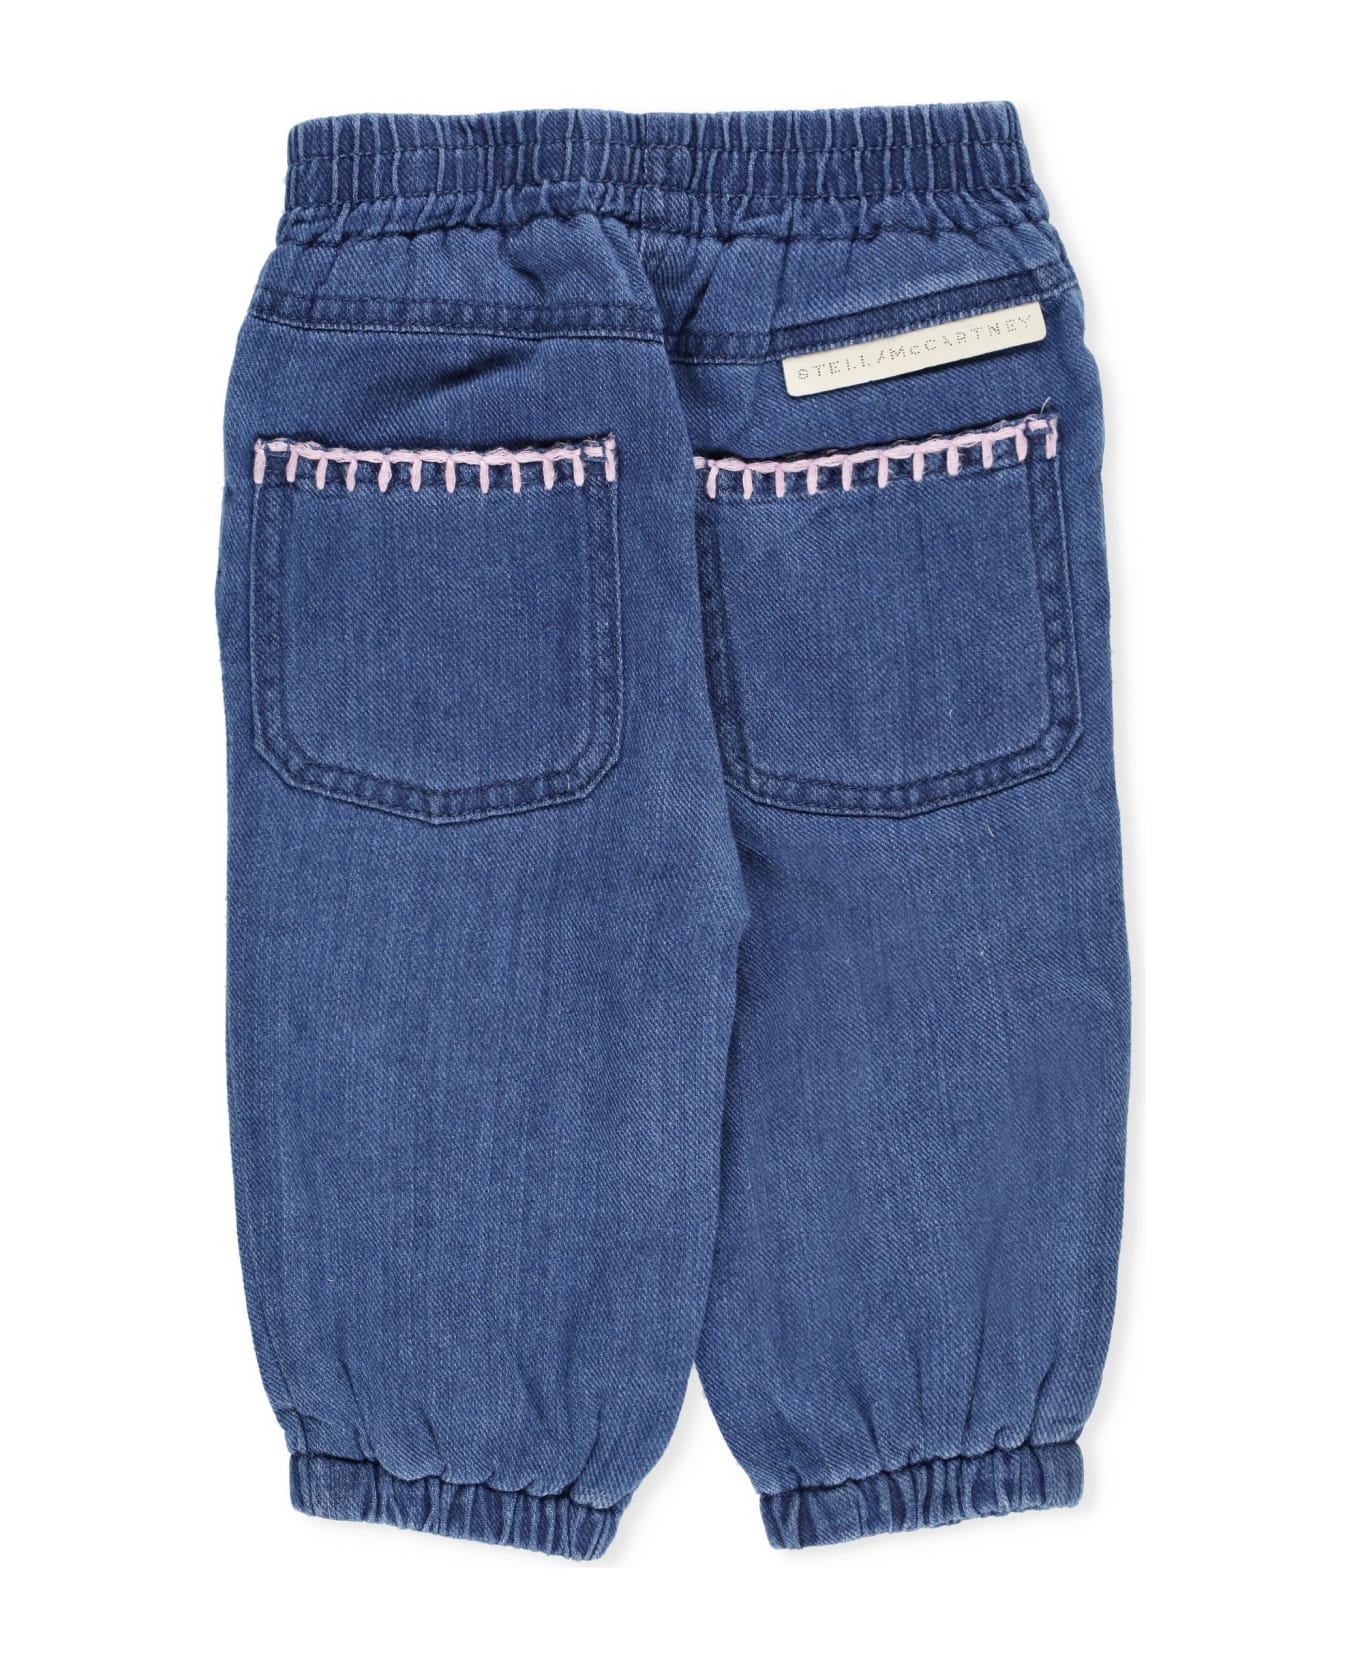 Stella McCartney Pants With Embroideries - DENIM